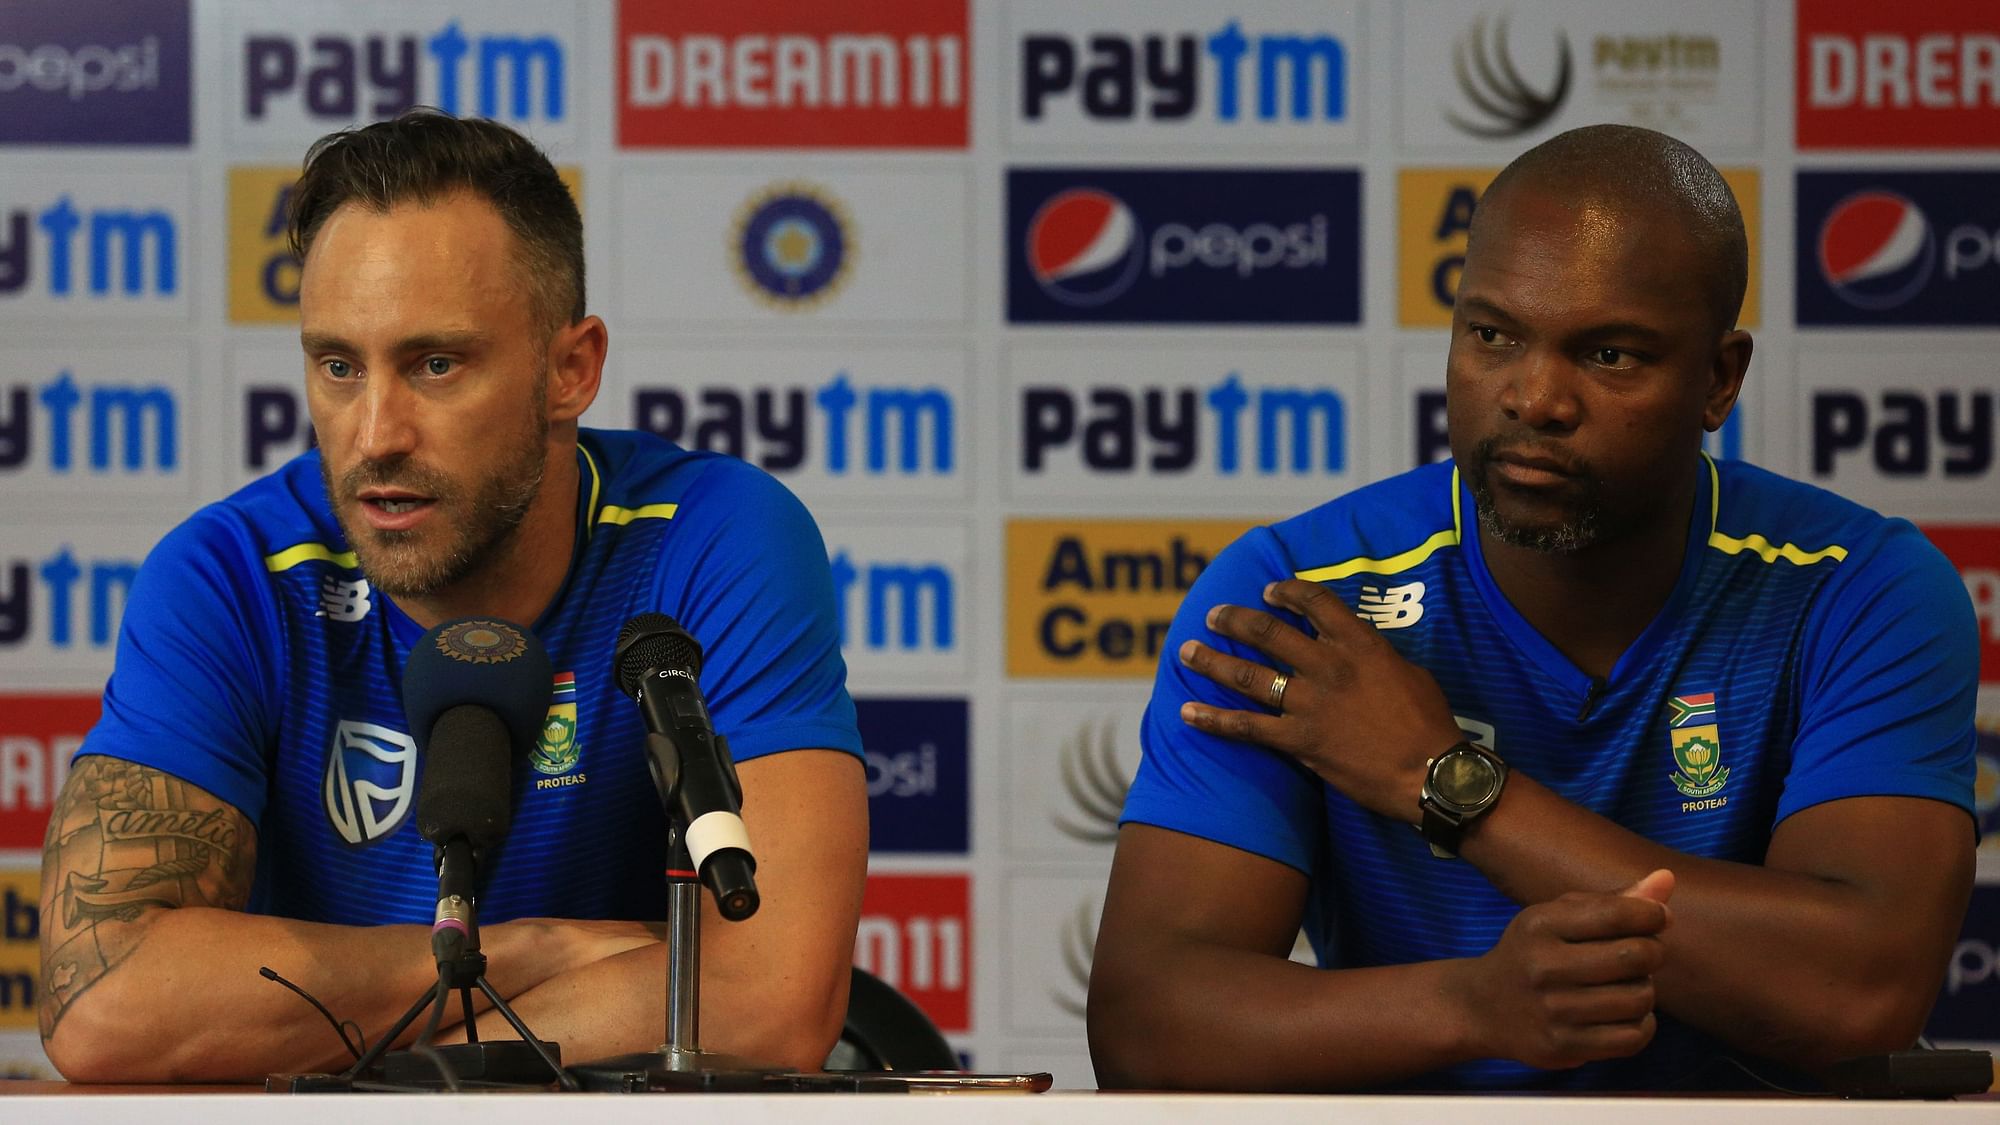 South Africa skipper Faf Du Plessis is not sold on the idea of a ‘Super Series of one-day games, involving the so-called ‘Big Three’ of India, Australia and England and has criticised the proposal.